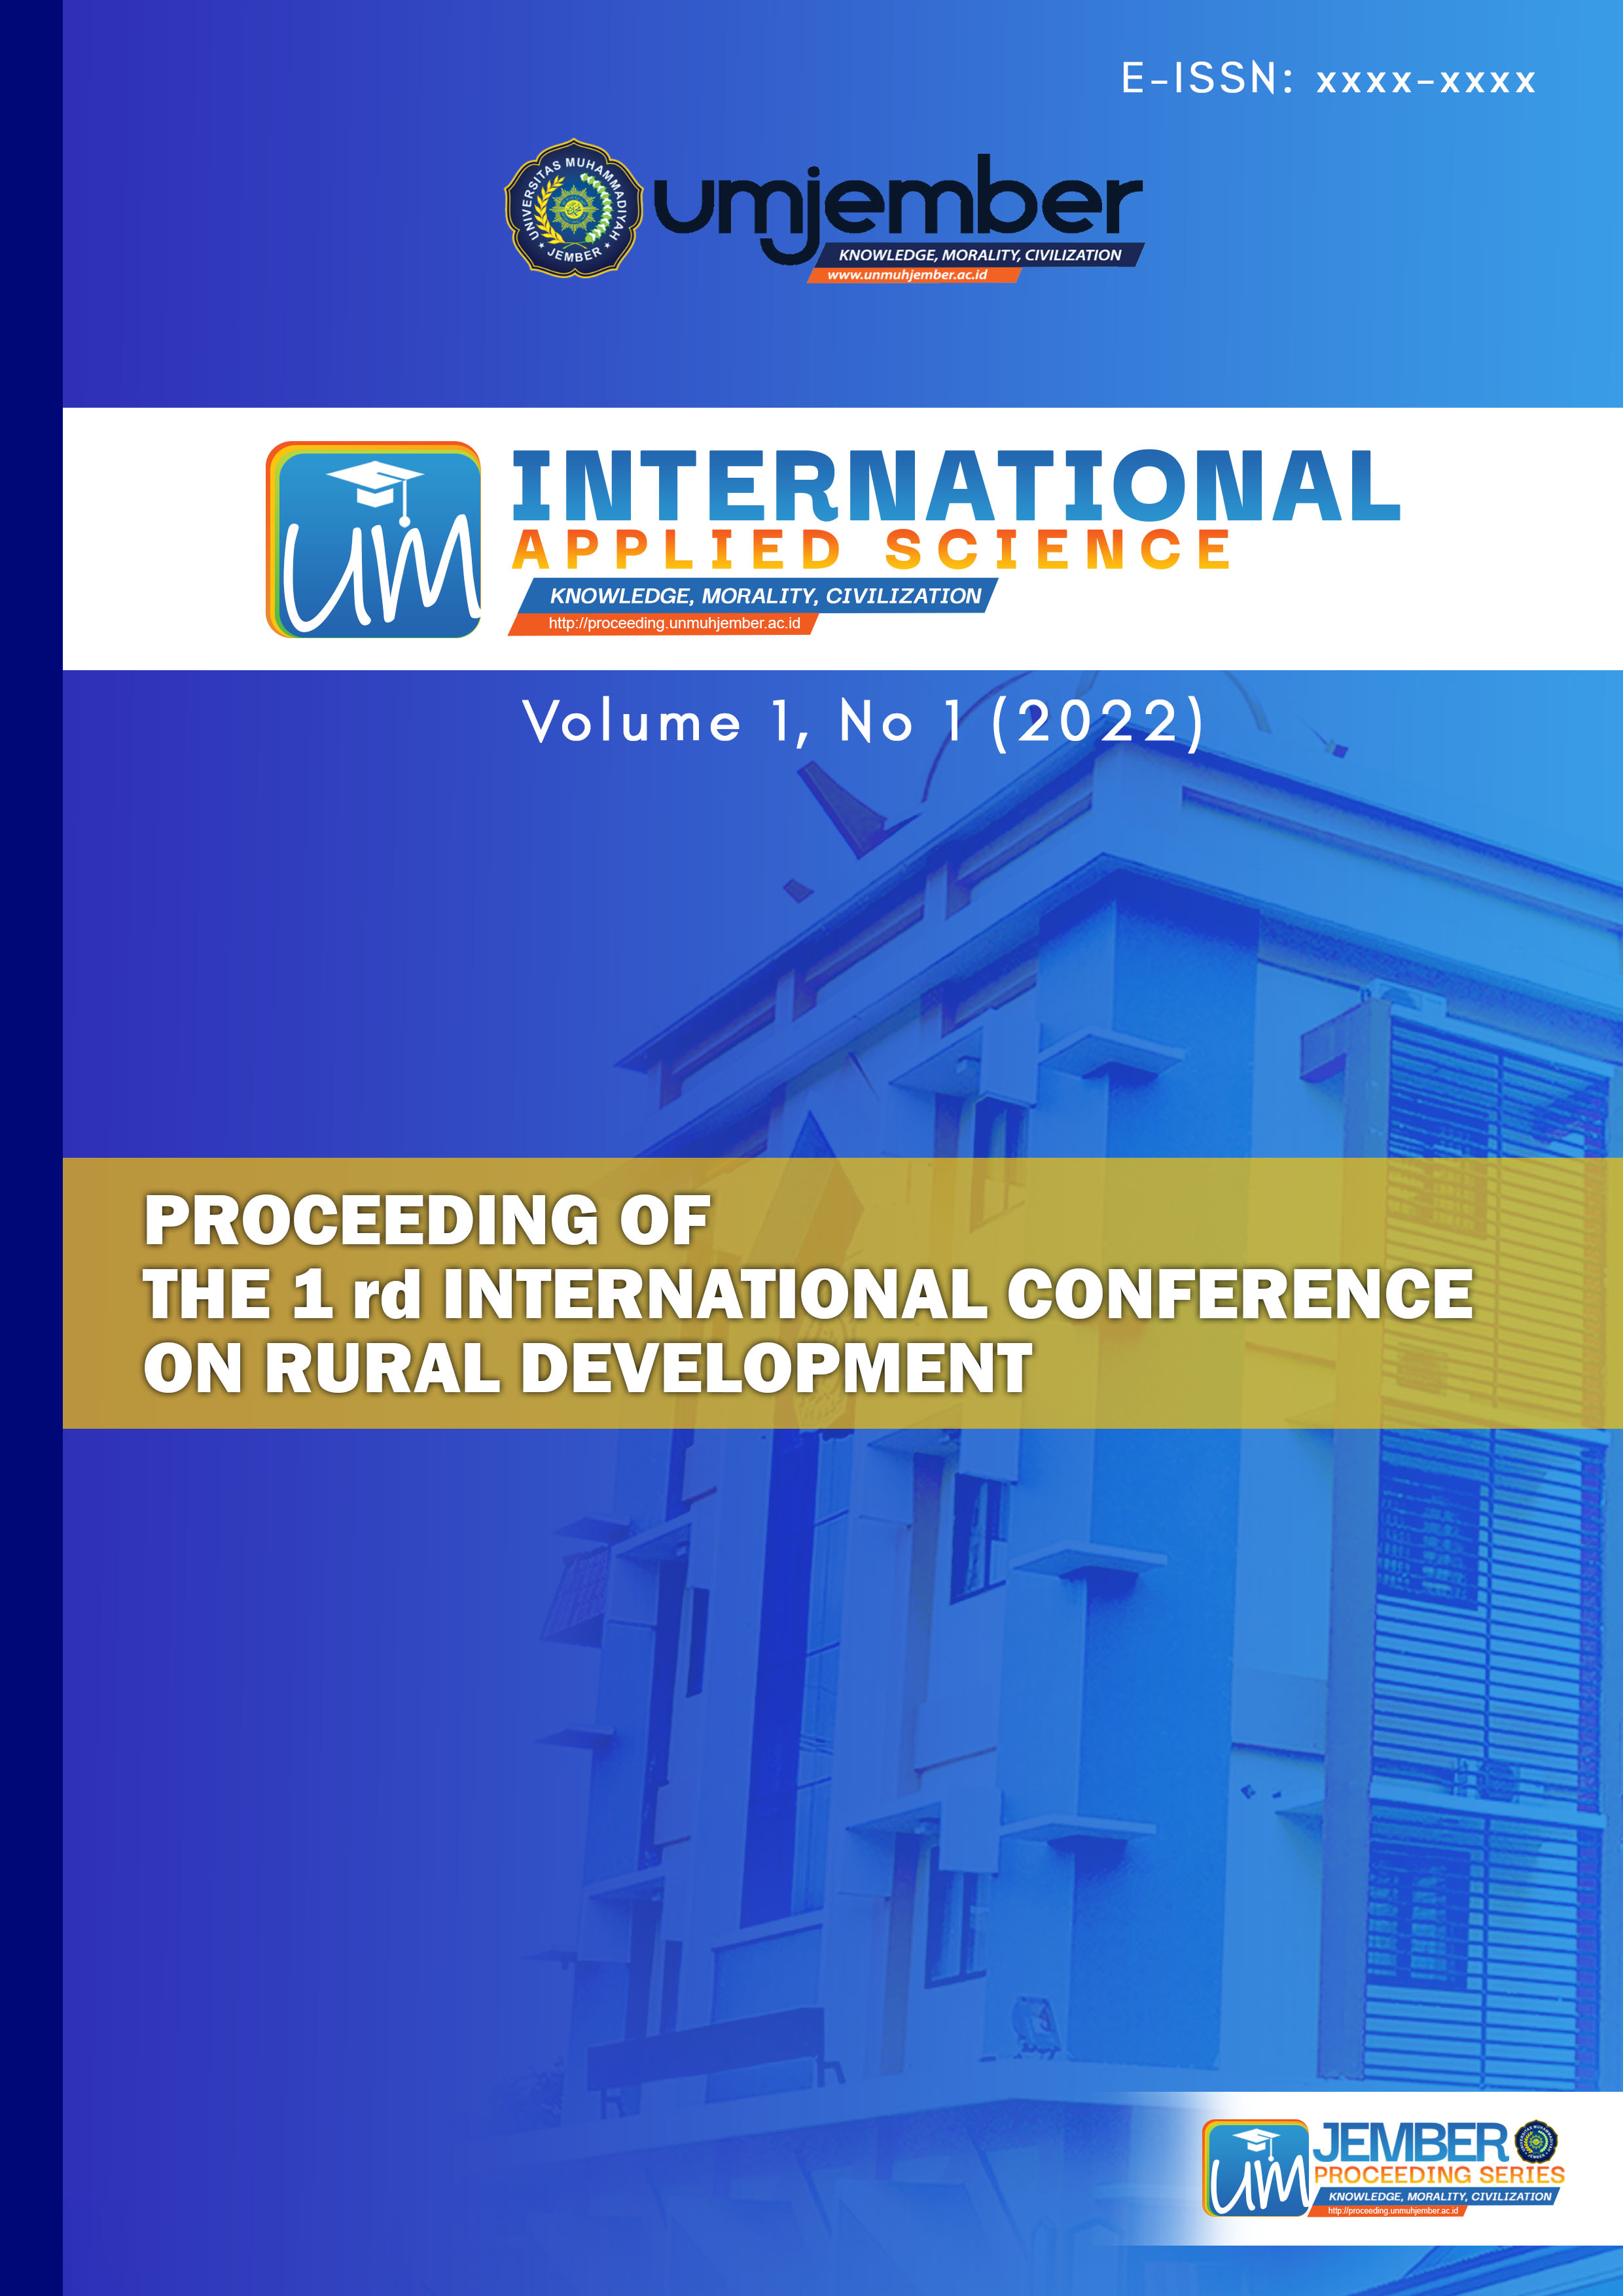 					View Vol. 1 No. 1 (2022): Proceedings of International Conference on Rural Development (ICRD) 2020
				